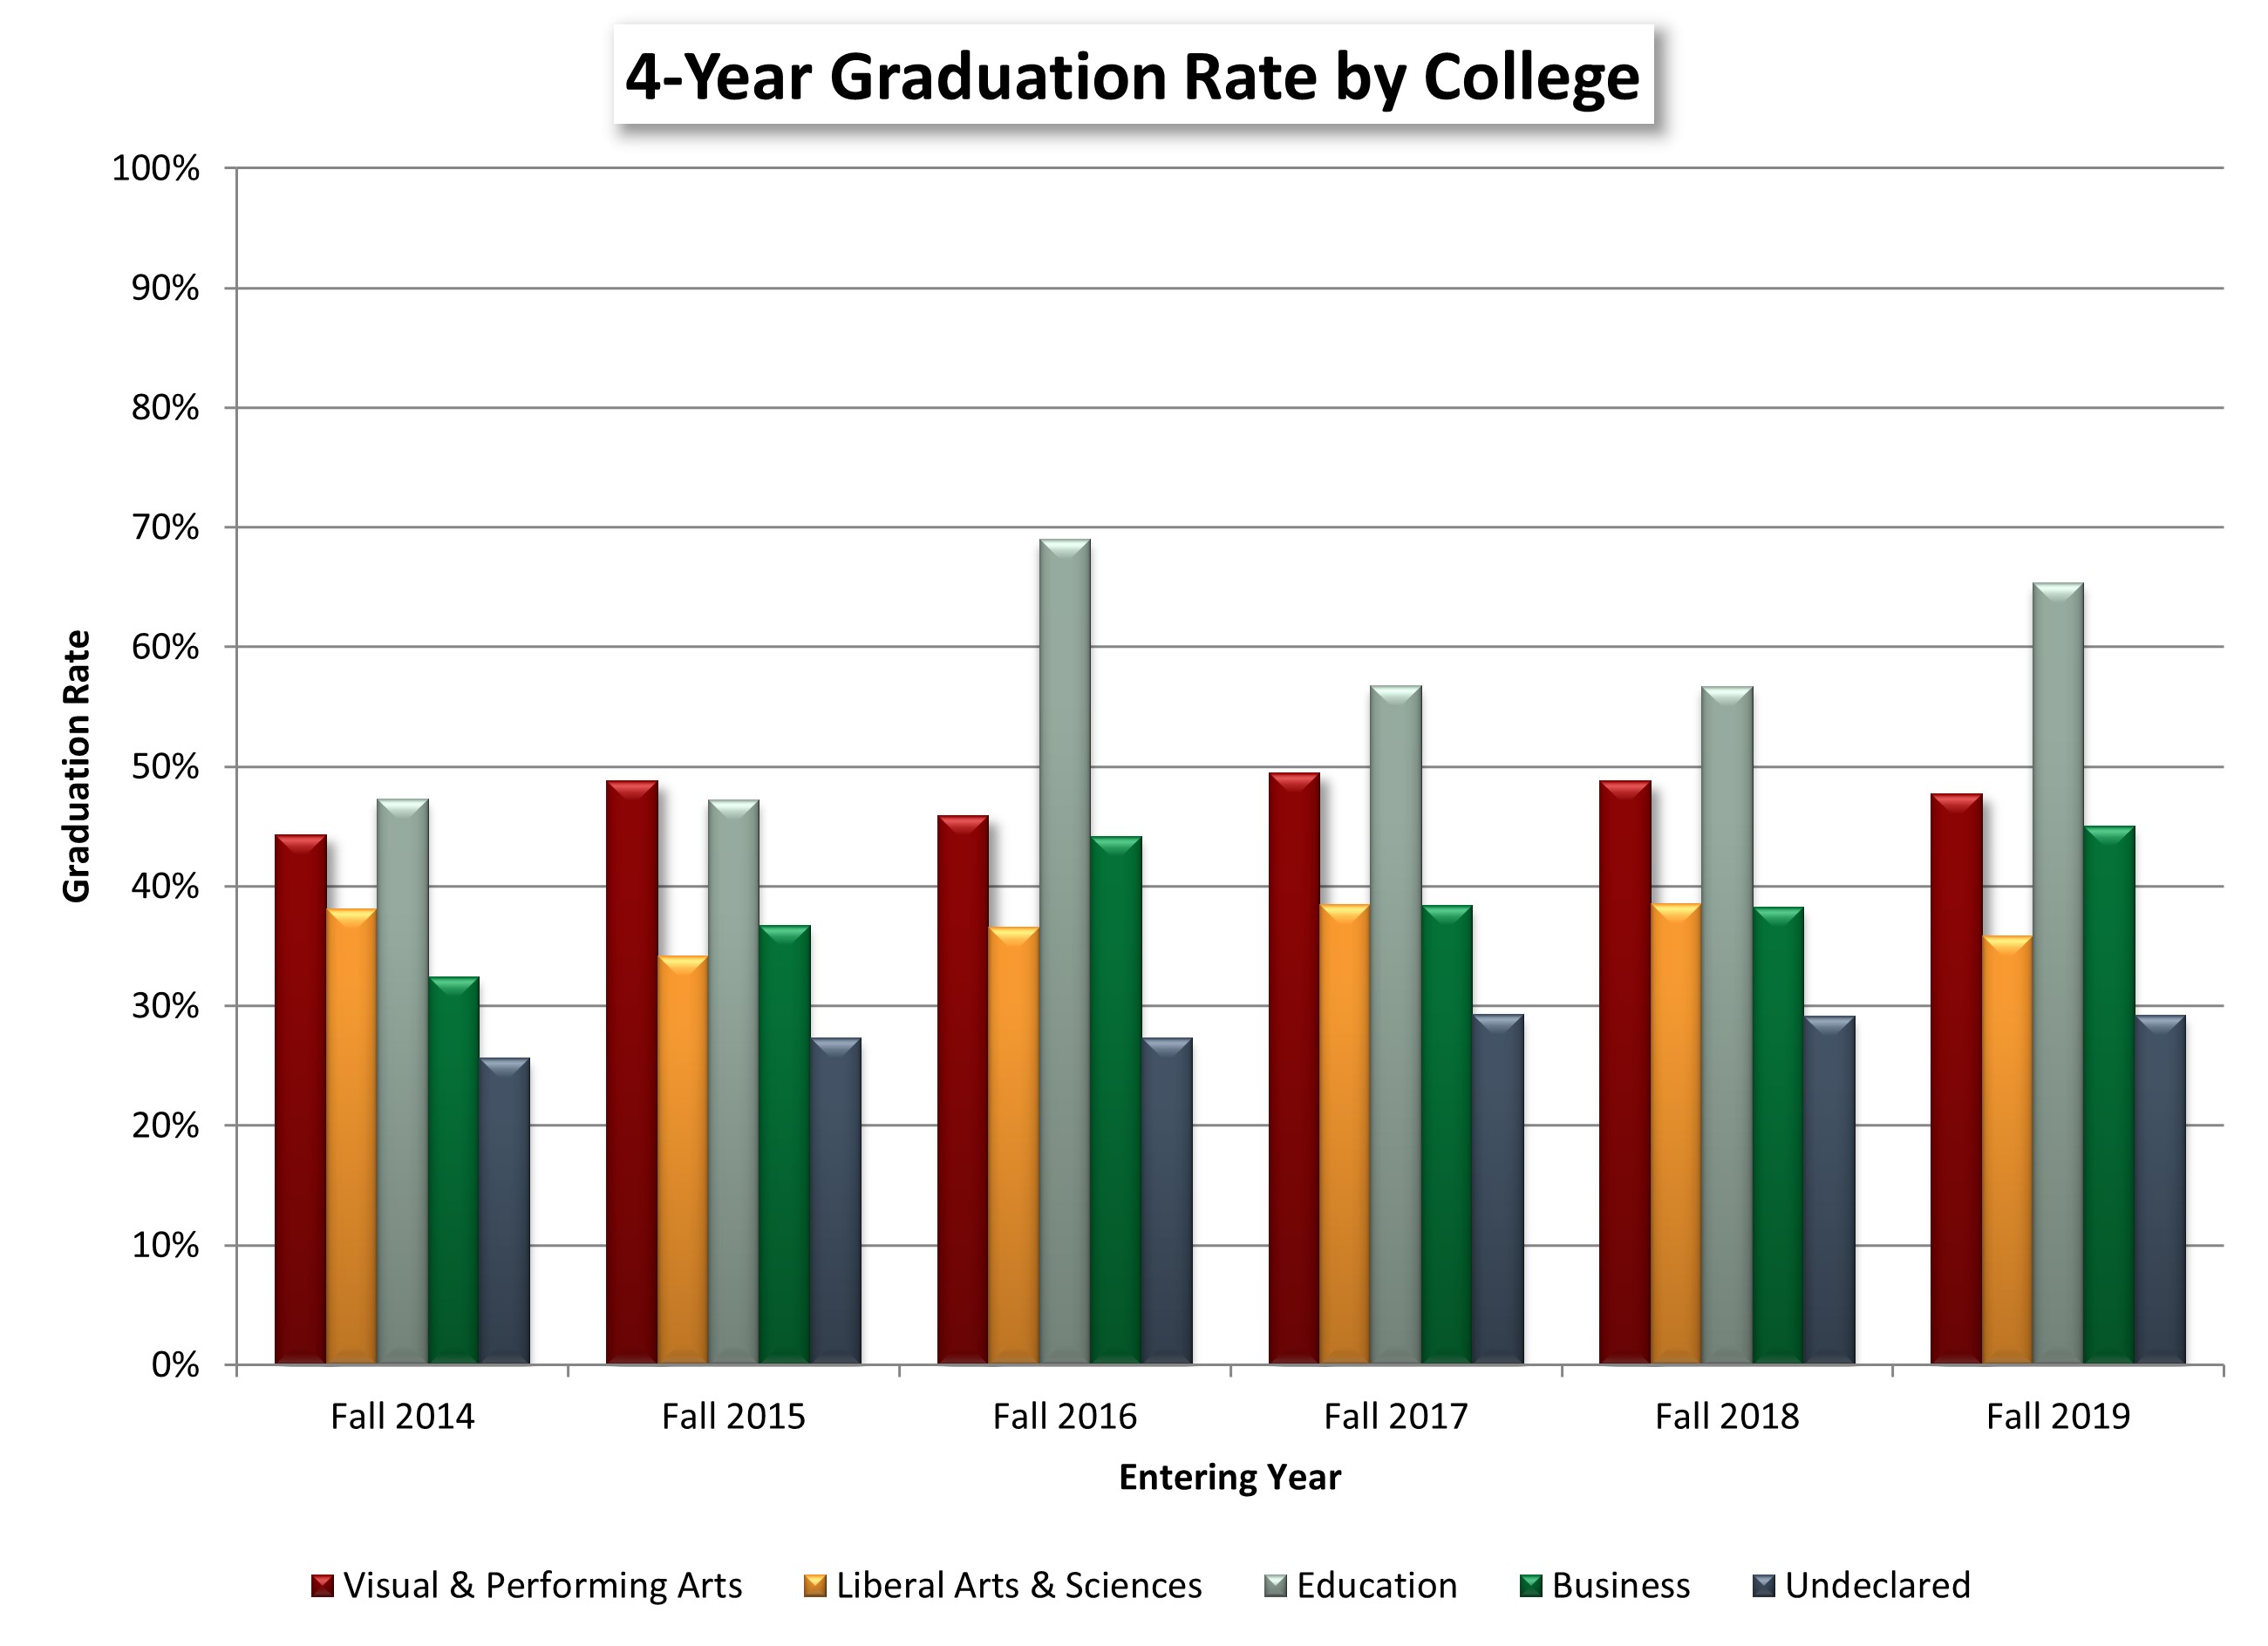 4-Year Graduation Rate by College chart